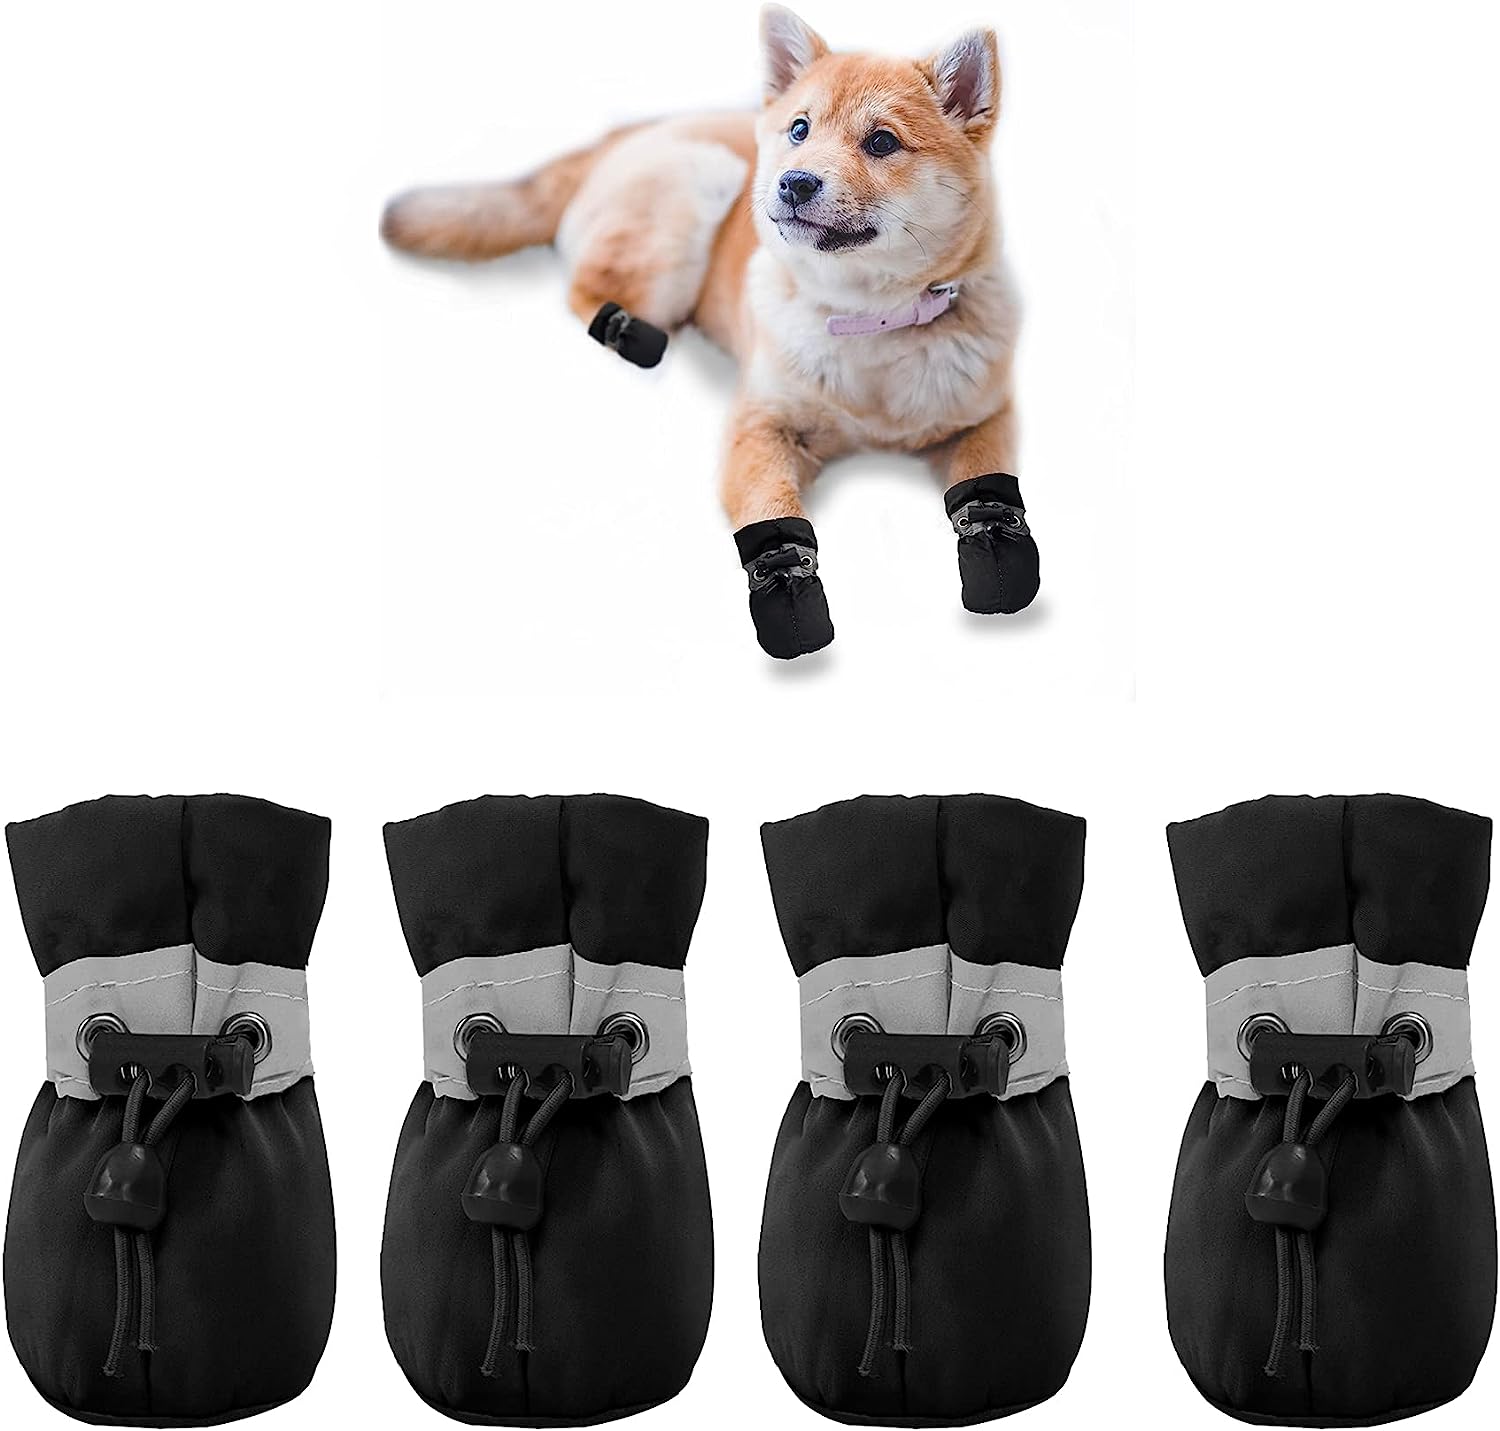 YAODHAOD Dog Shoes for Small Dogs, Hot Pavement Anti- [...]